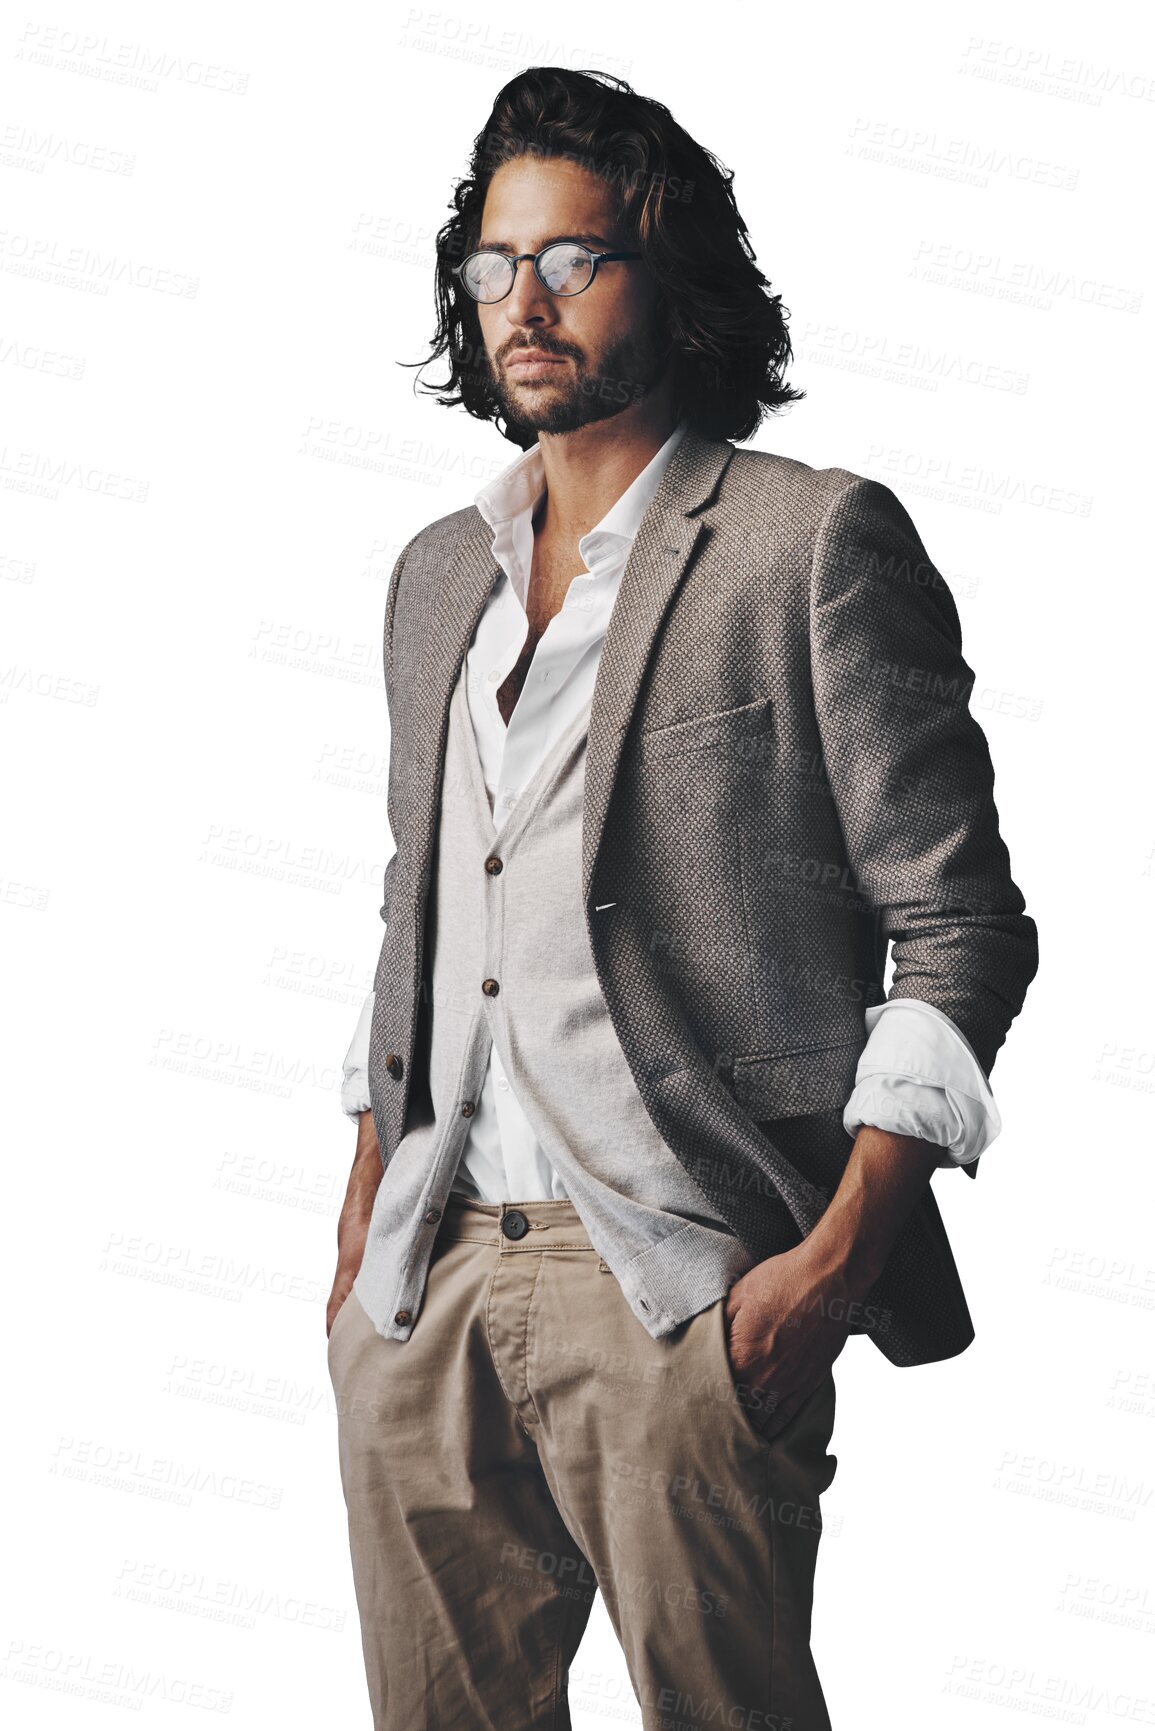 Buy stock photo Fashion, thinking and serious professional man on isolated, PNG and transparent background. Business, confidence and person with decision, choice and pride in stylish, trendy clothes and outfit